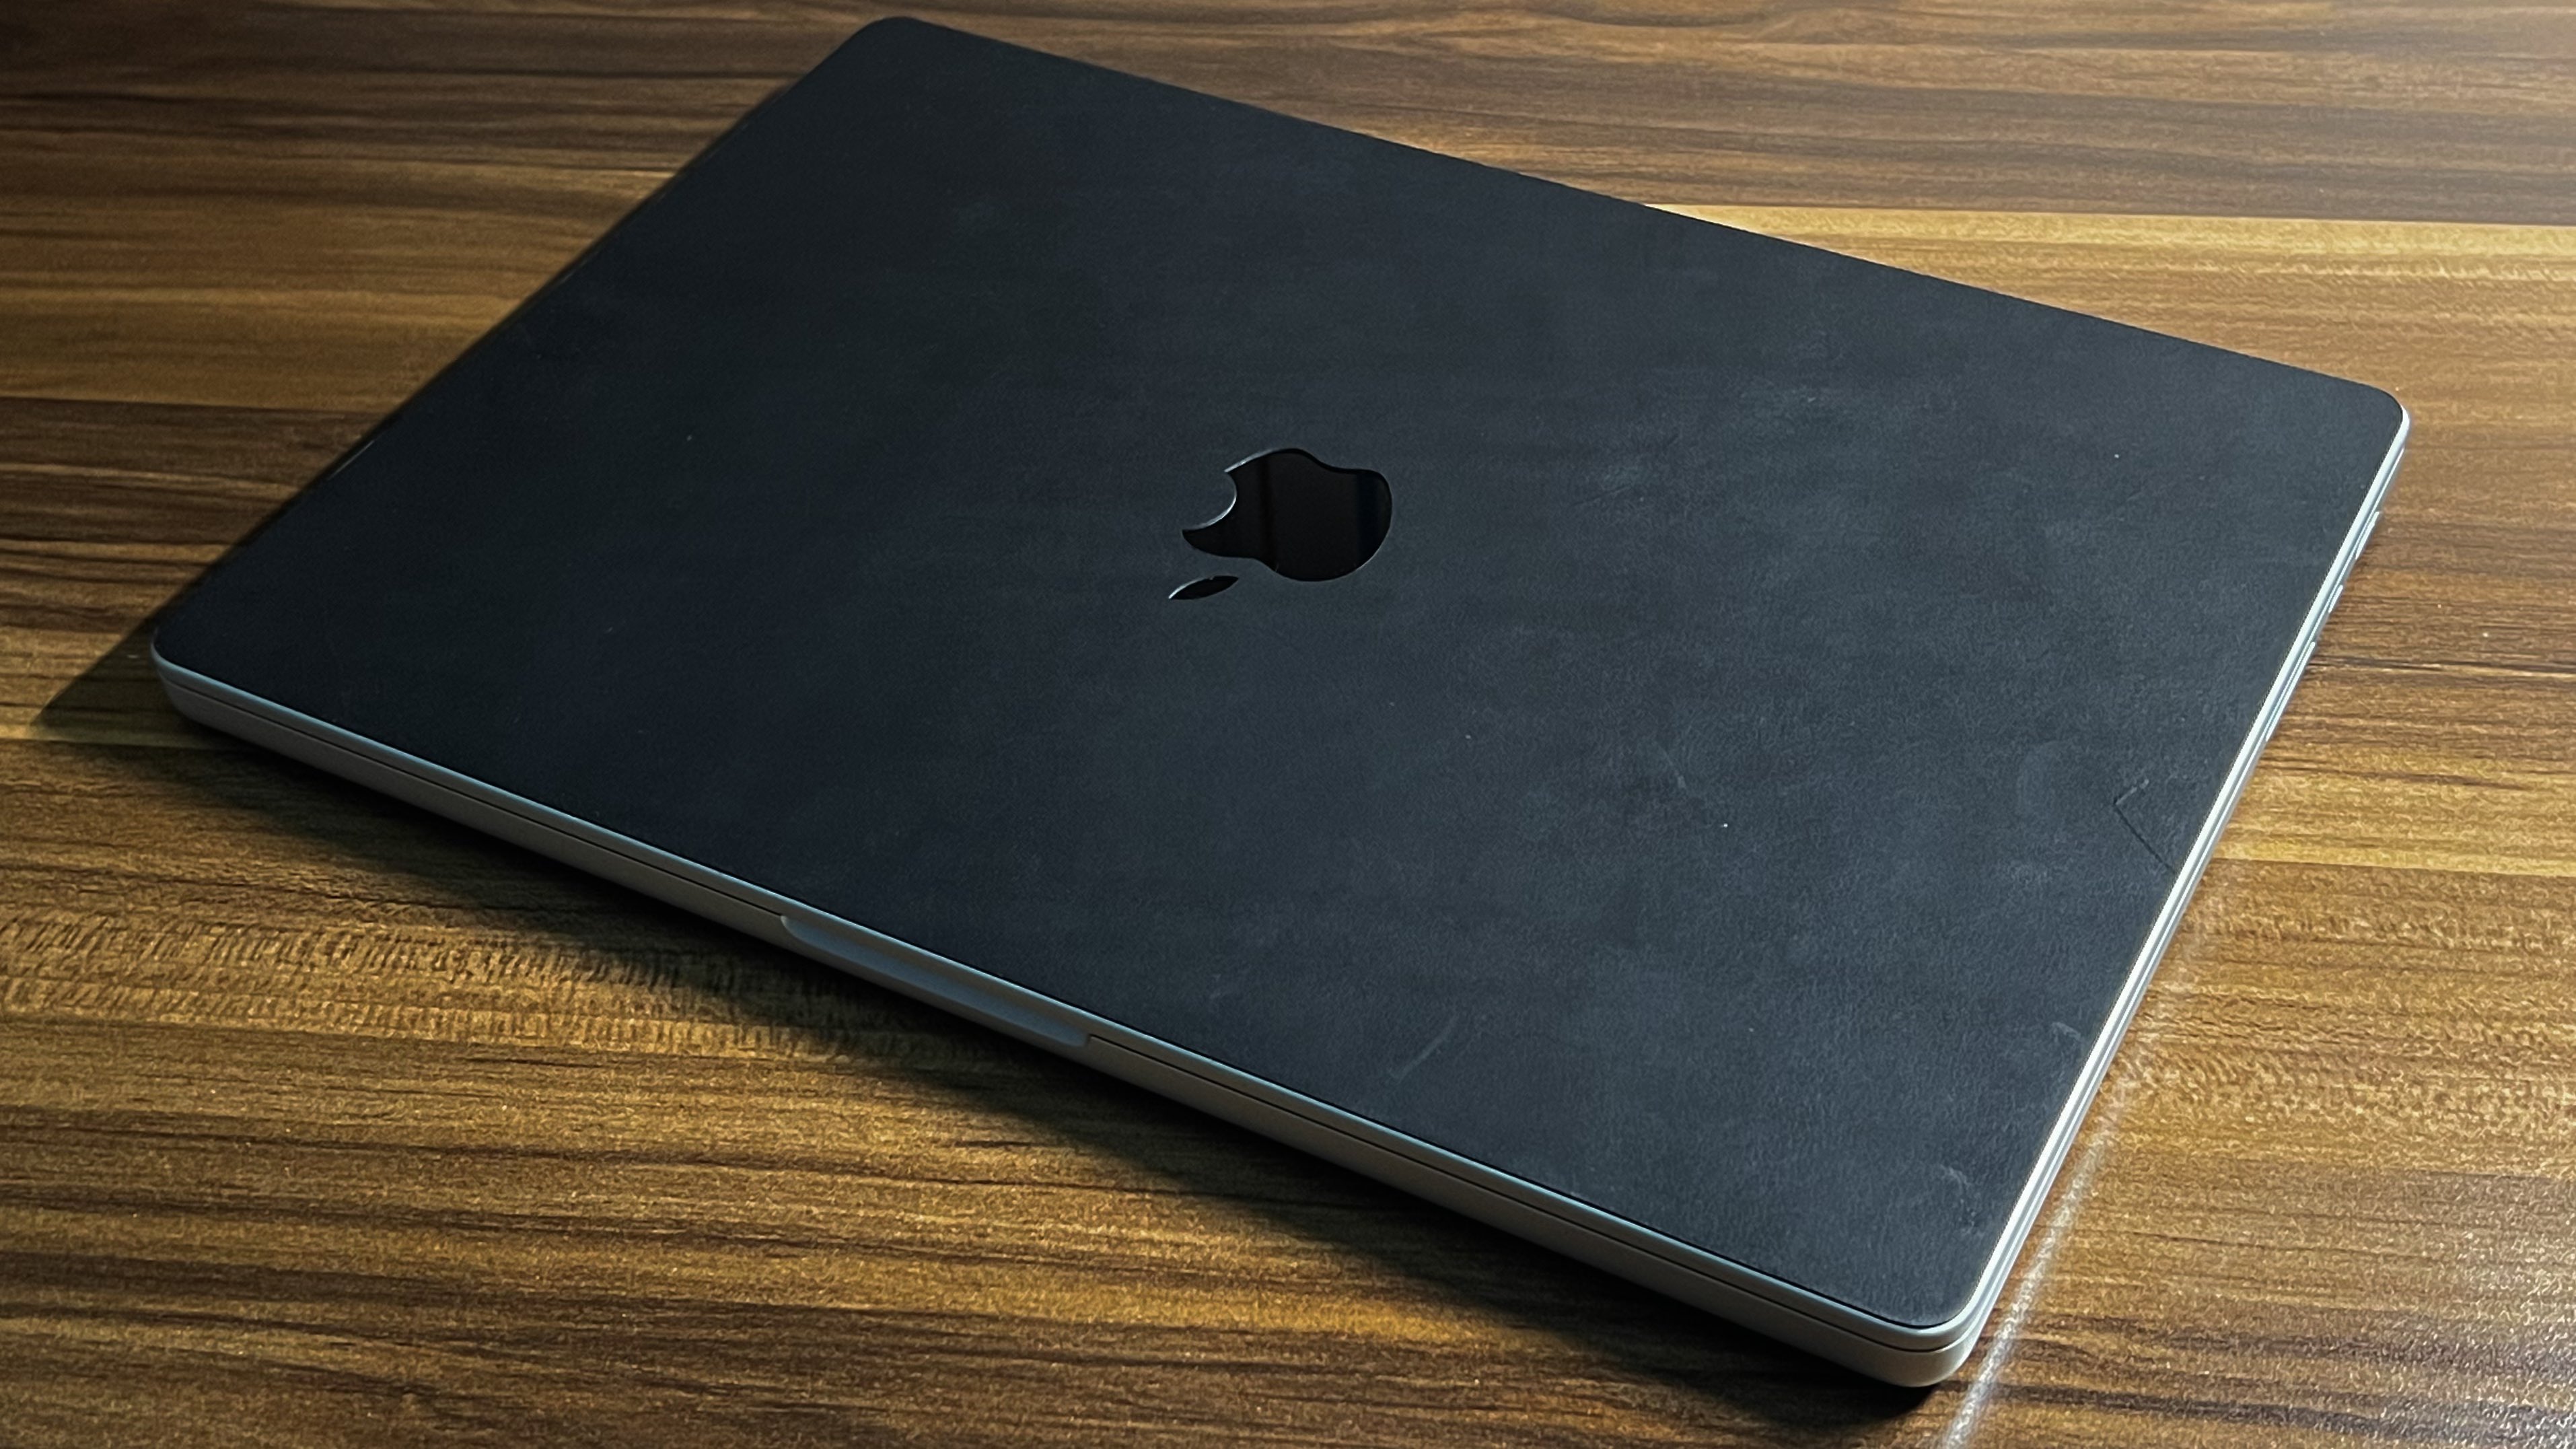 Ishan Agarwal on Twitter: "Applied @dbrand's Leather skin on my MacBook Pro  14” &amp; I love it 😍 So fine &amp; high quality and as dbrand claims, is  real &amp; authentic leather